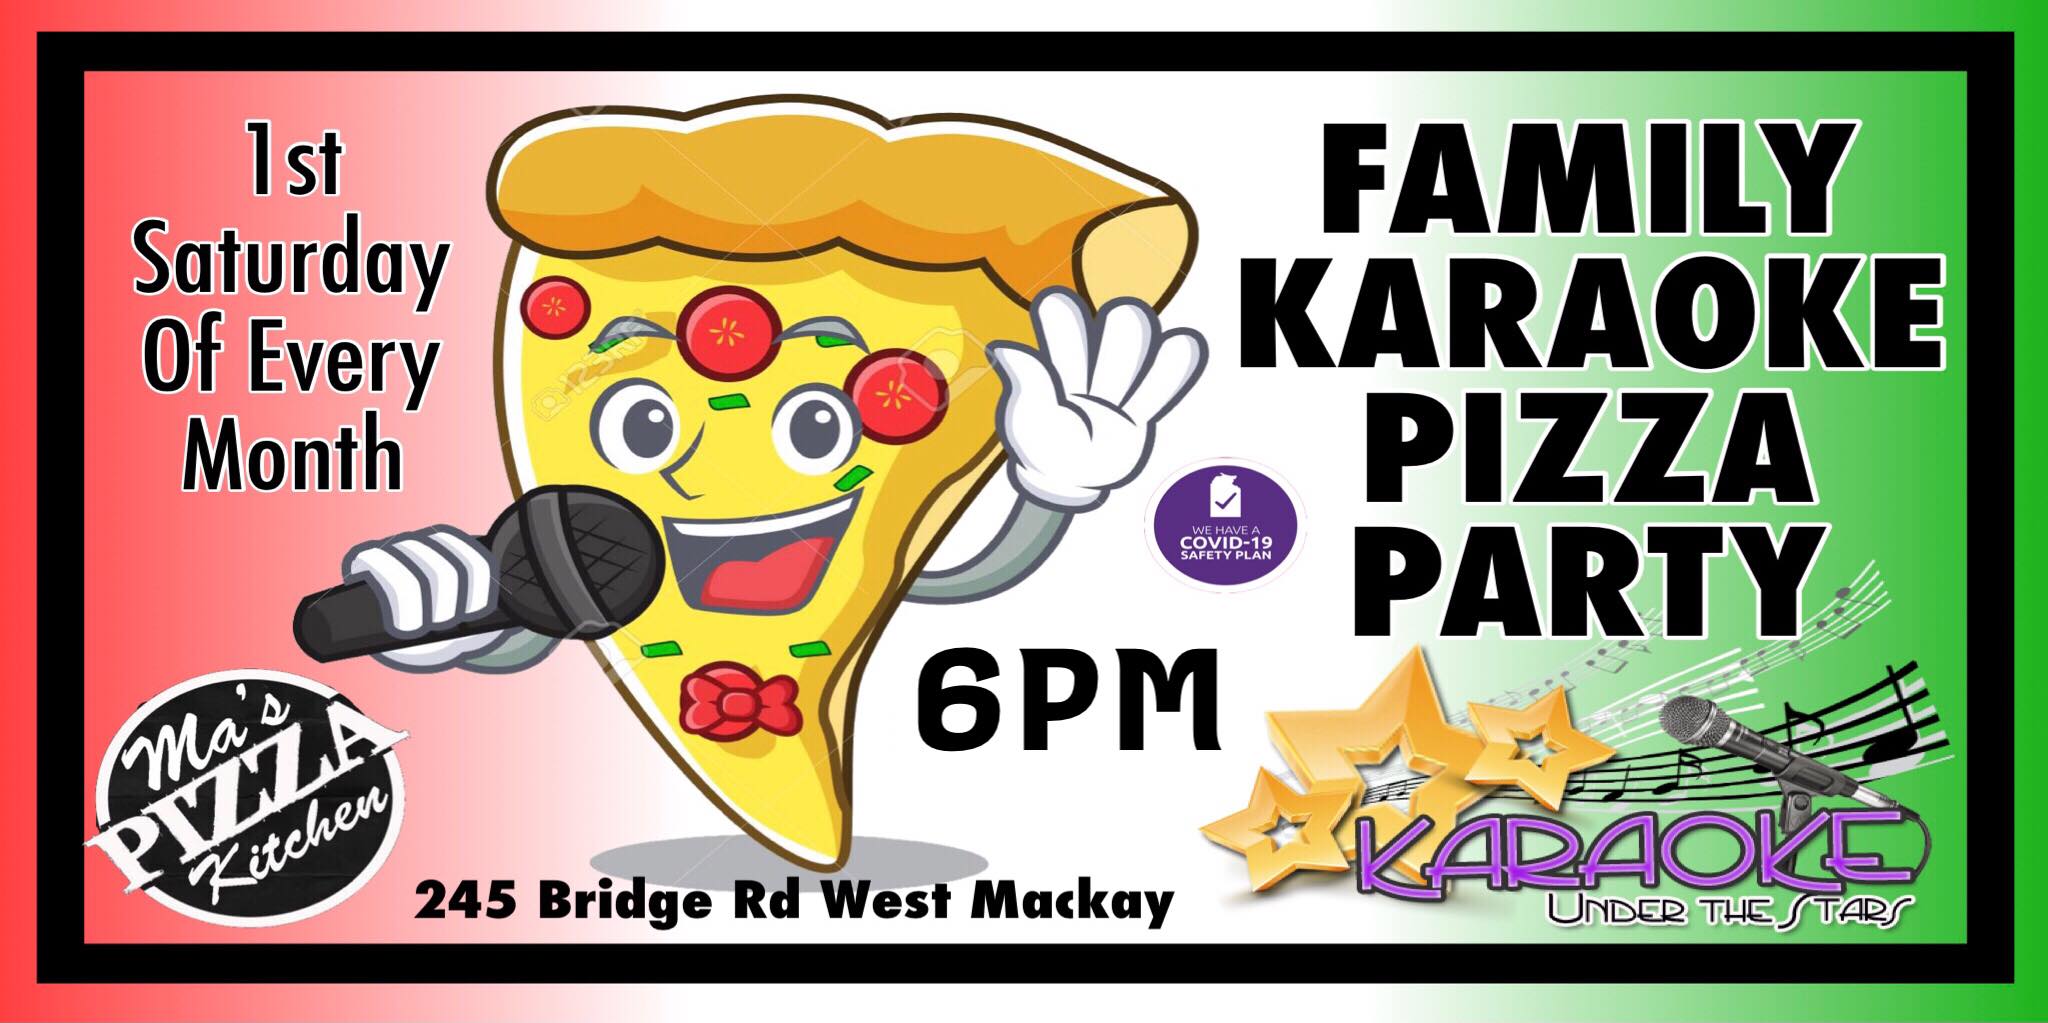 Event Poster for Family Karaoke Pizza Party | Mackay | EventsontheHorizon.com